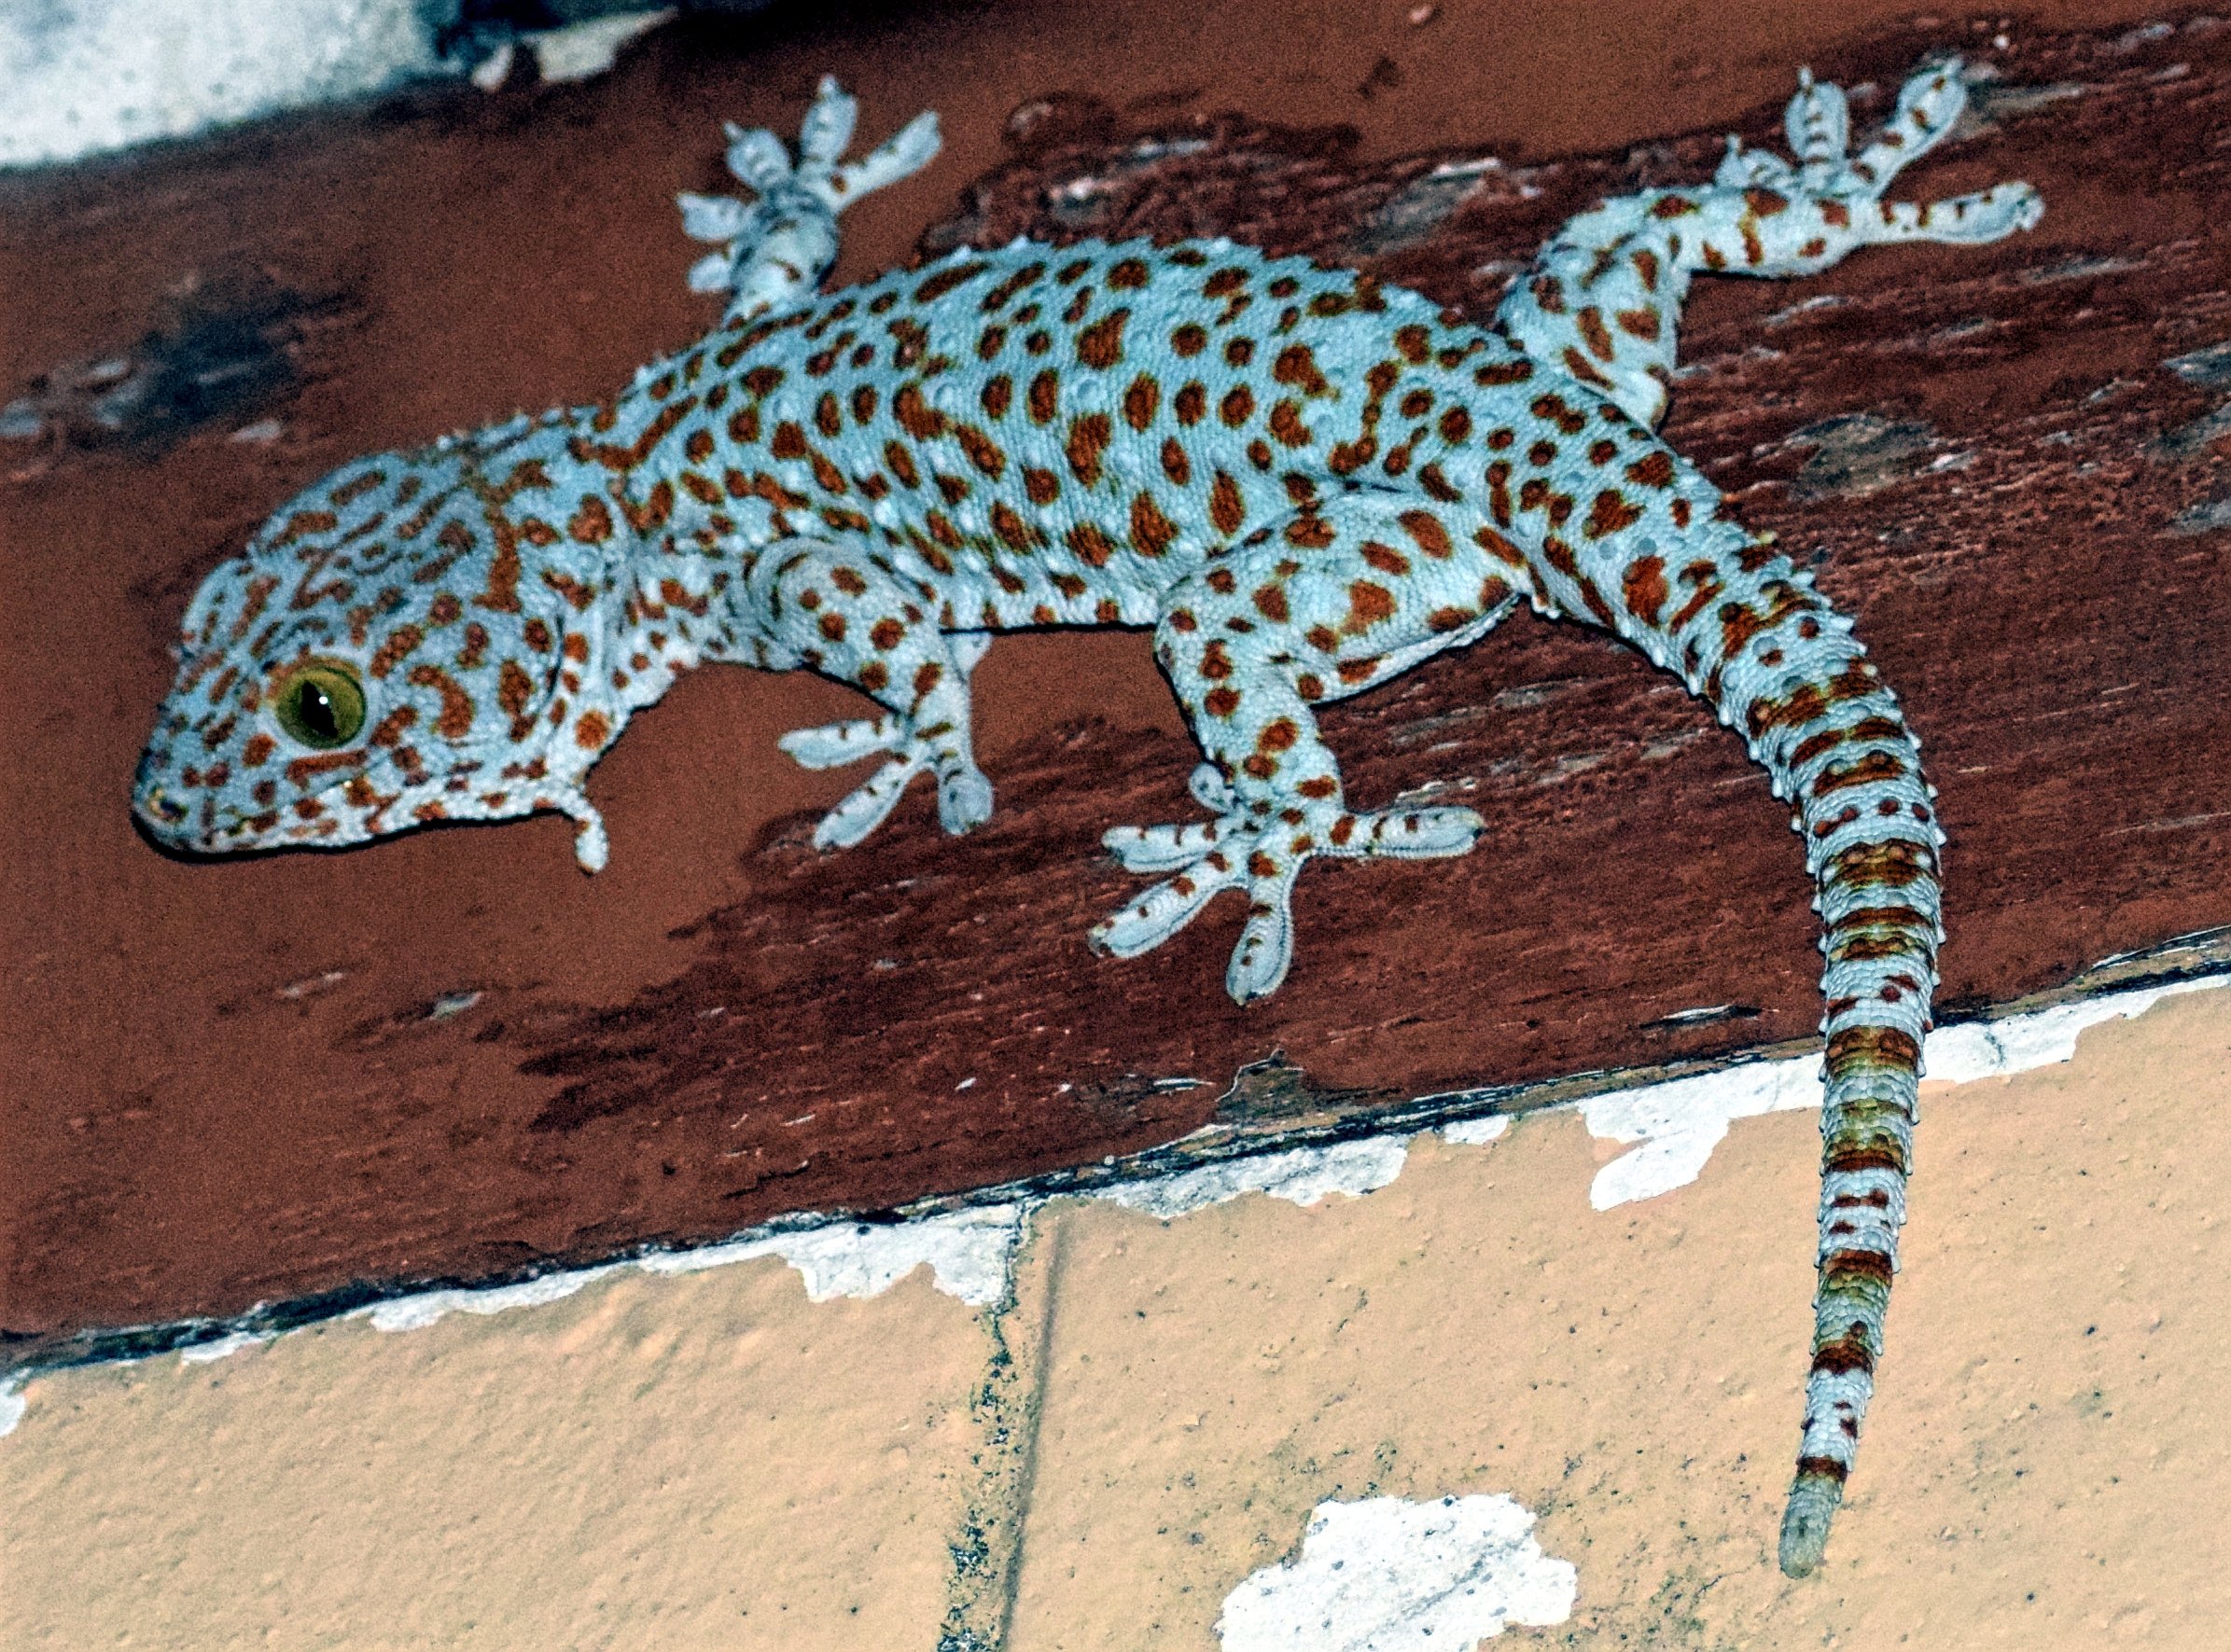 The Tokay Gecko illegal trade in India's northeast | The Third Pole